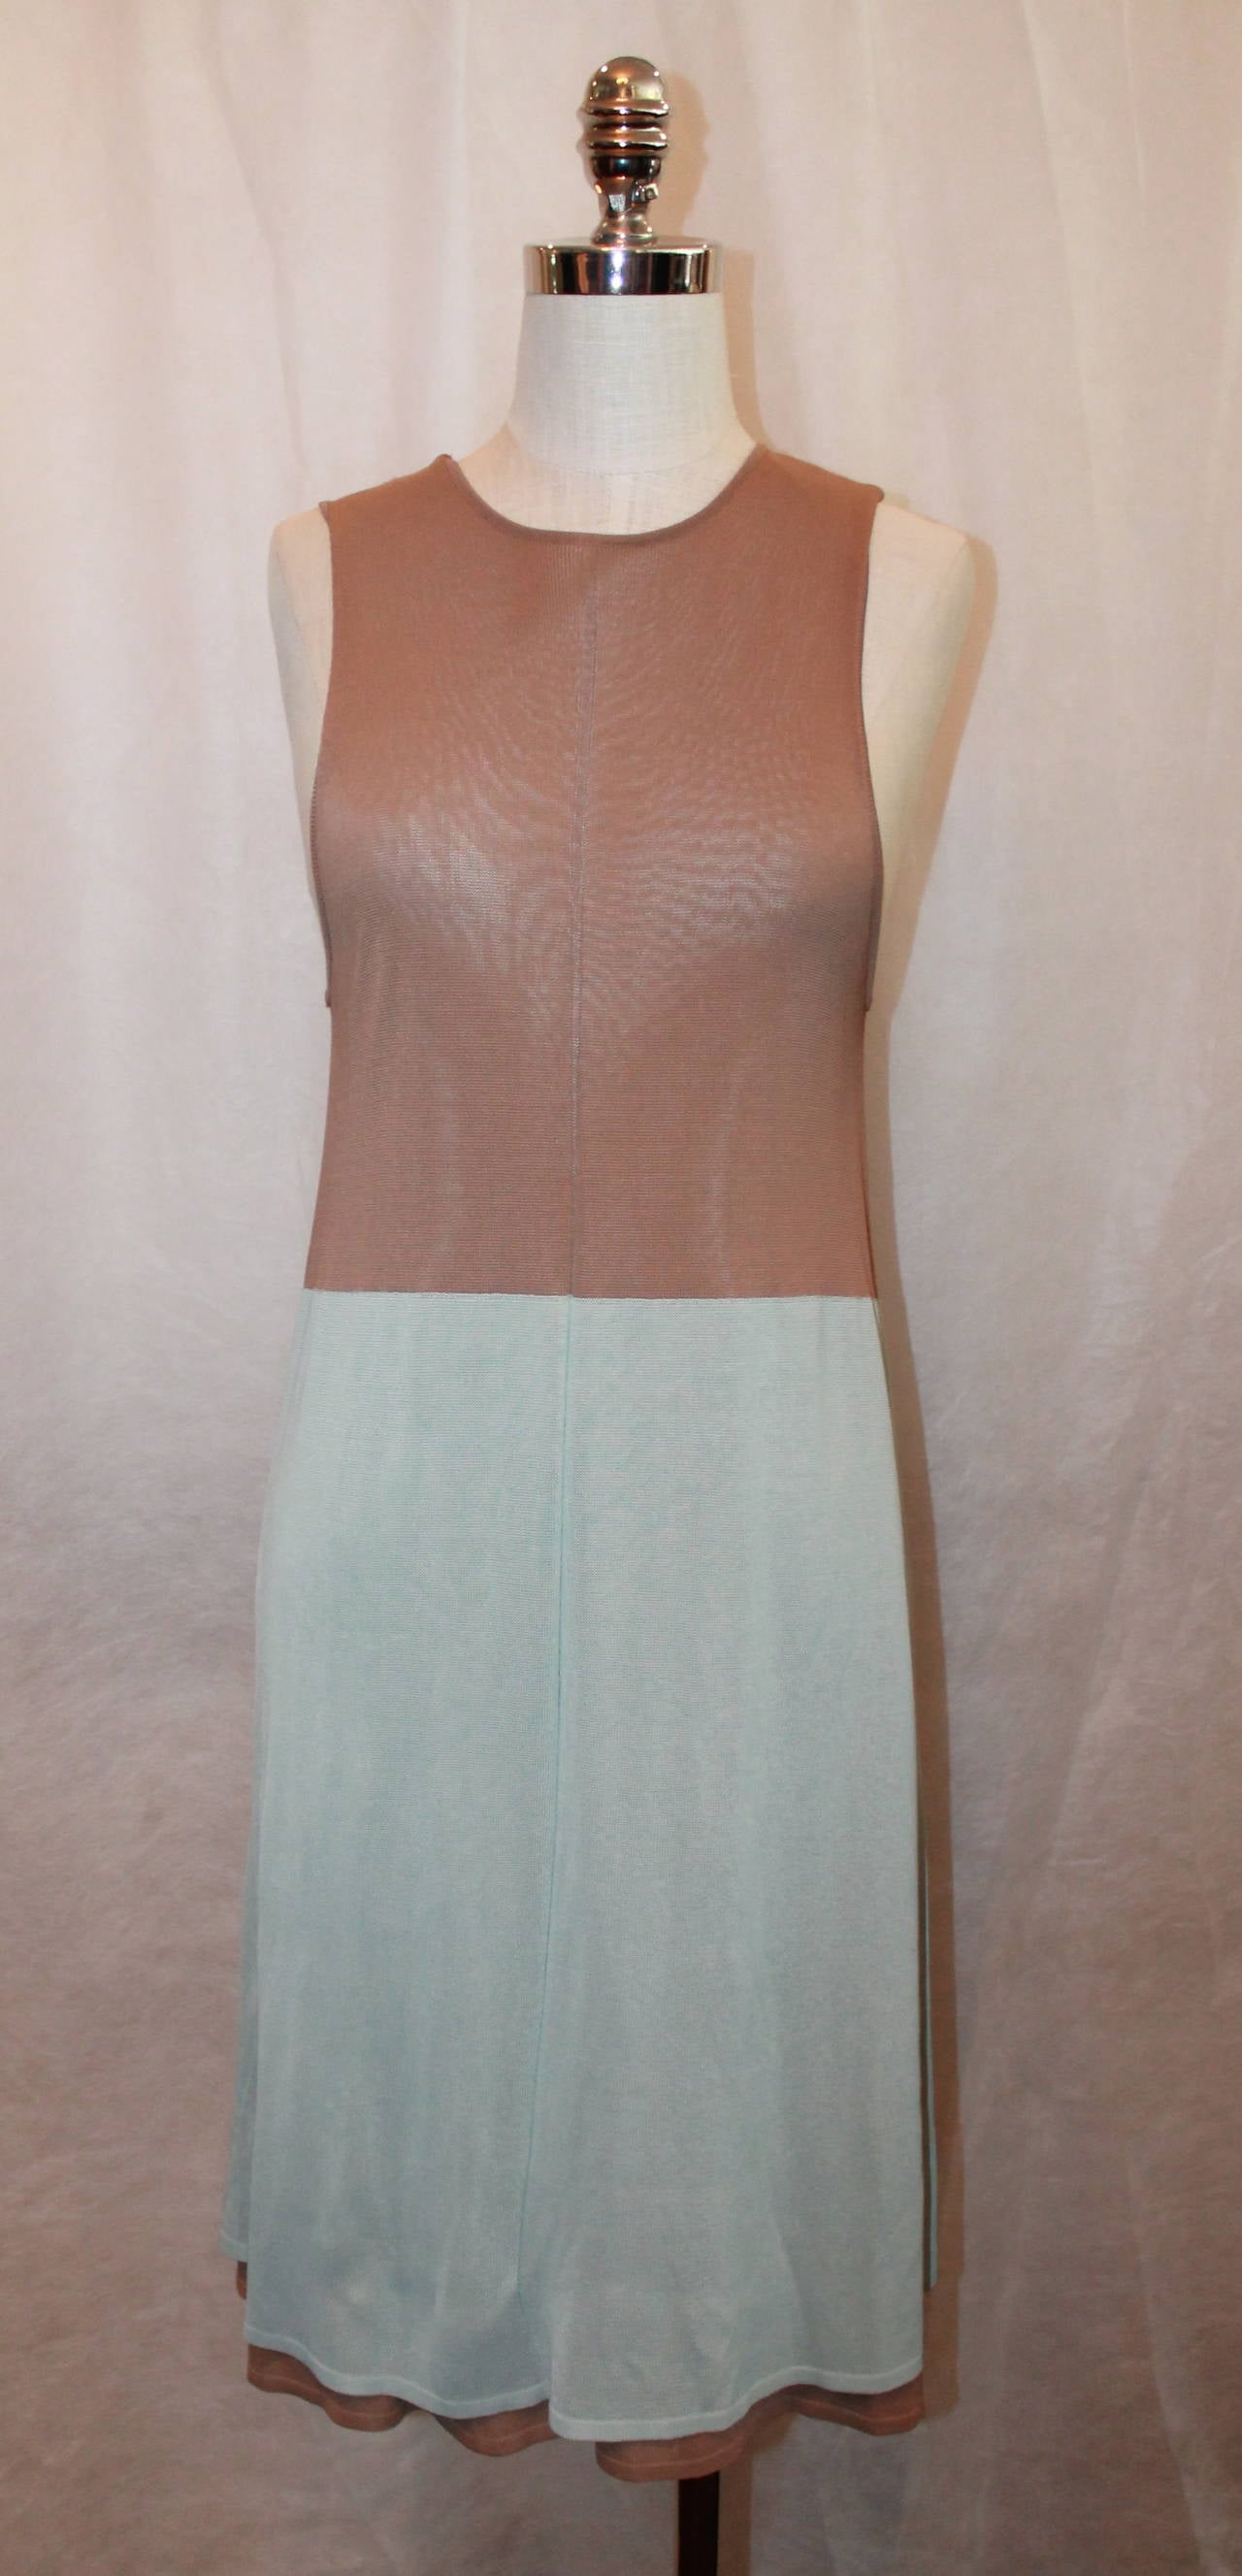 Balenciaga Tan and Pale Blue Color Block Loose Sleeveless Dress. There is a lining underneath the dress, and the arm hole falls longer than sitting right underneath the underarm. 

Measurements:
Bust: up to 32.5 "
Waist: up to 34